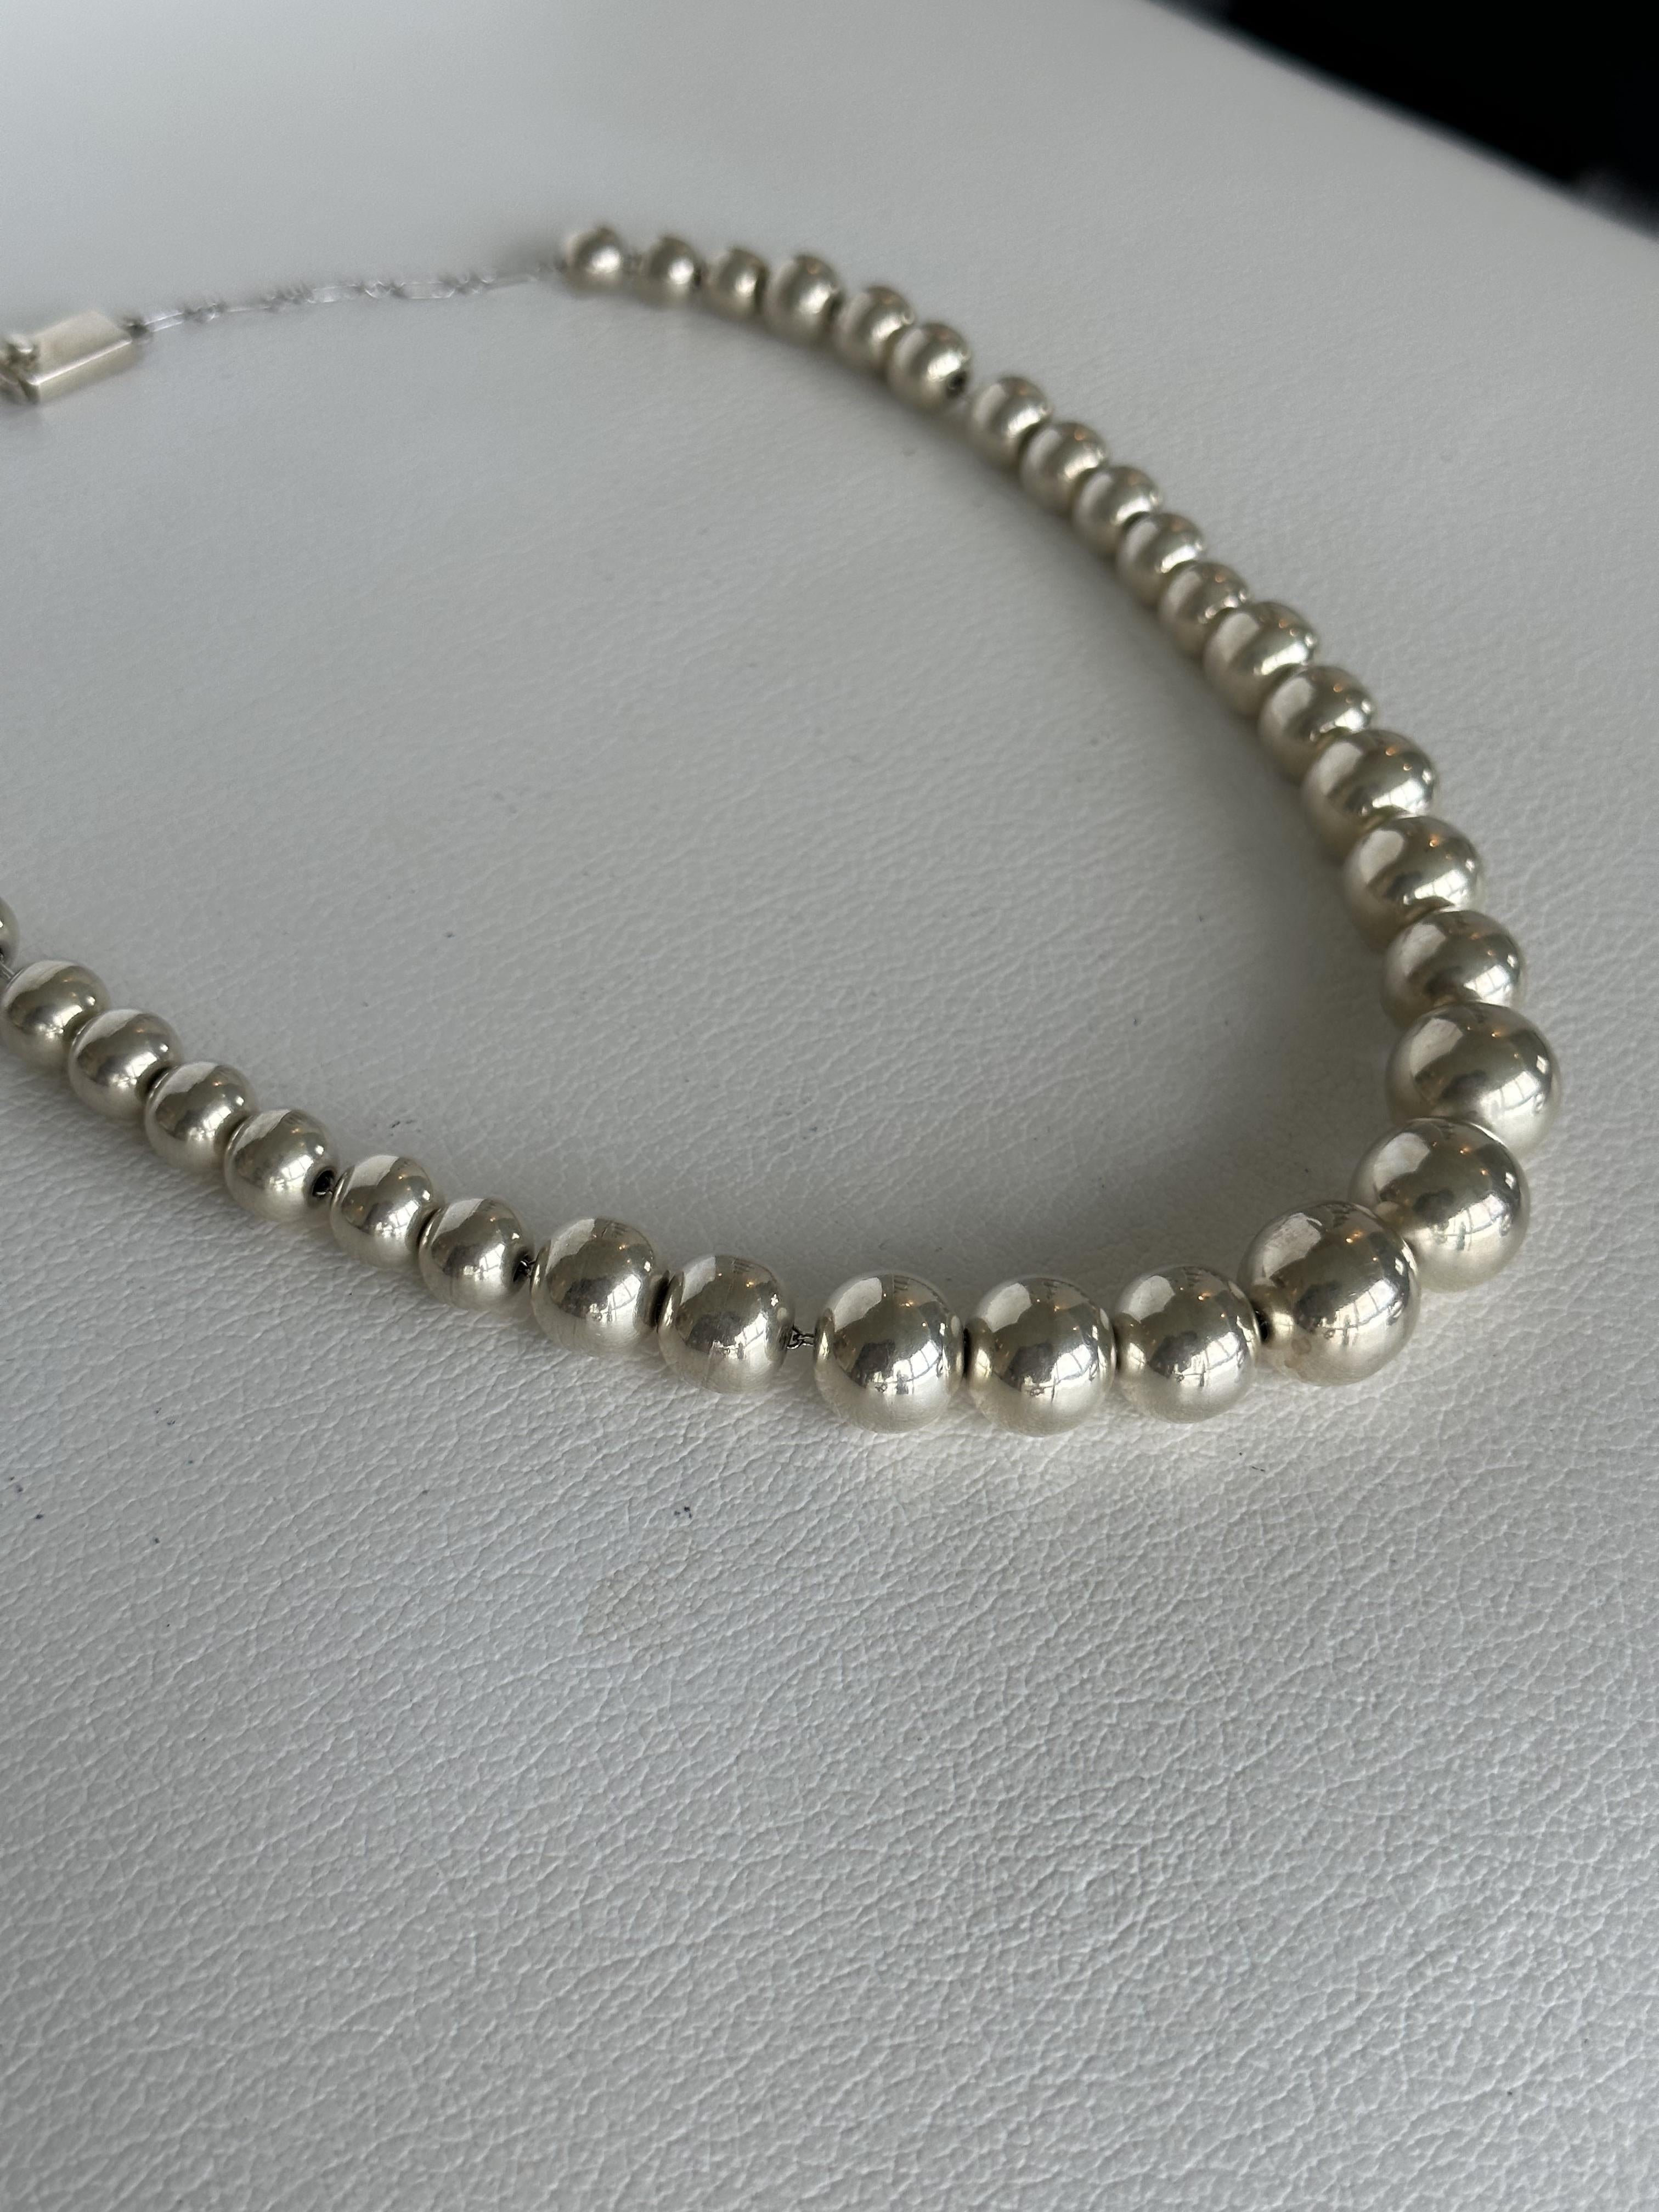 Graduated Sterling Silver Ball Bead Necklace.
Necklace length: 19 inches/48 cm.
Number of silver beads: 36.
Maximum dimension: 14.03 length x 14.95 width.
Minimum dimension: 6.41 length x 7.06 width.
Total weight: 66.40 grams.